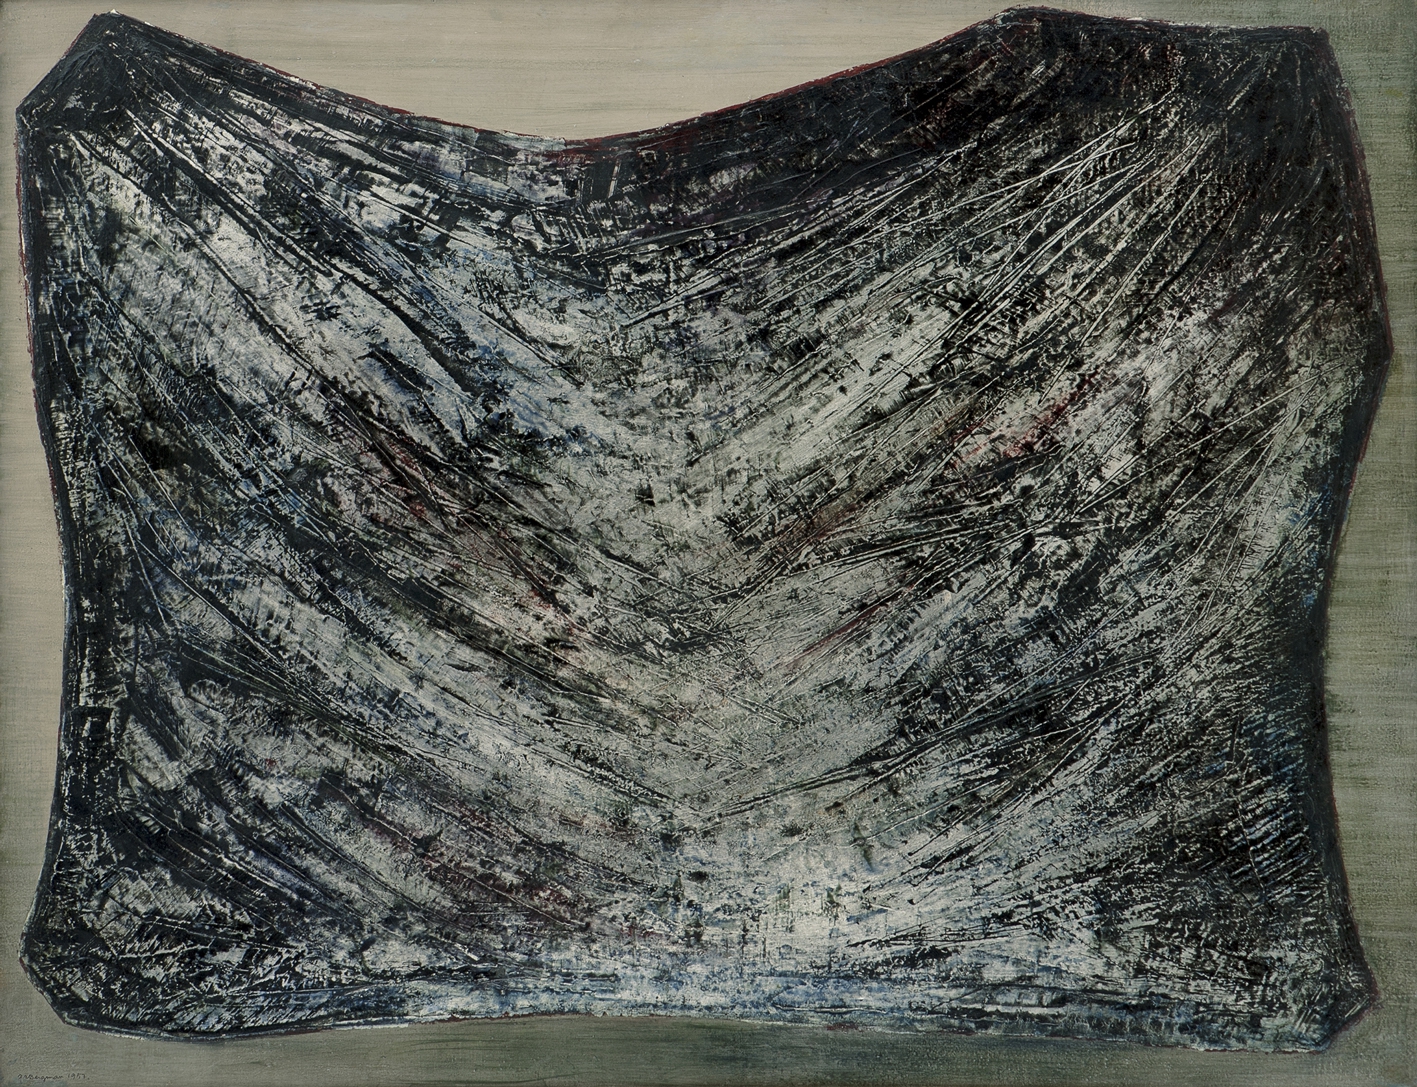 Anna-Eva Bergman, No 1 - 1957 Fjell (1957), 1957, Oil and metal foil on canvas, 89,5 x 115,5 cm, Bought by Christen Sveaas in 2018